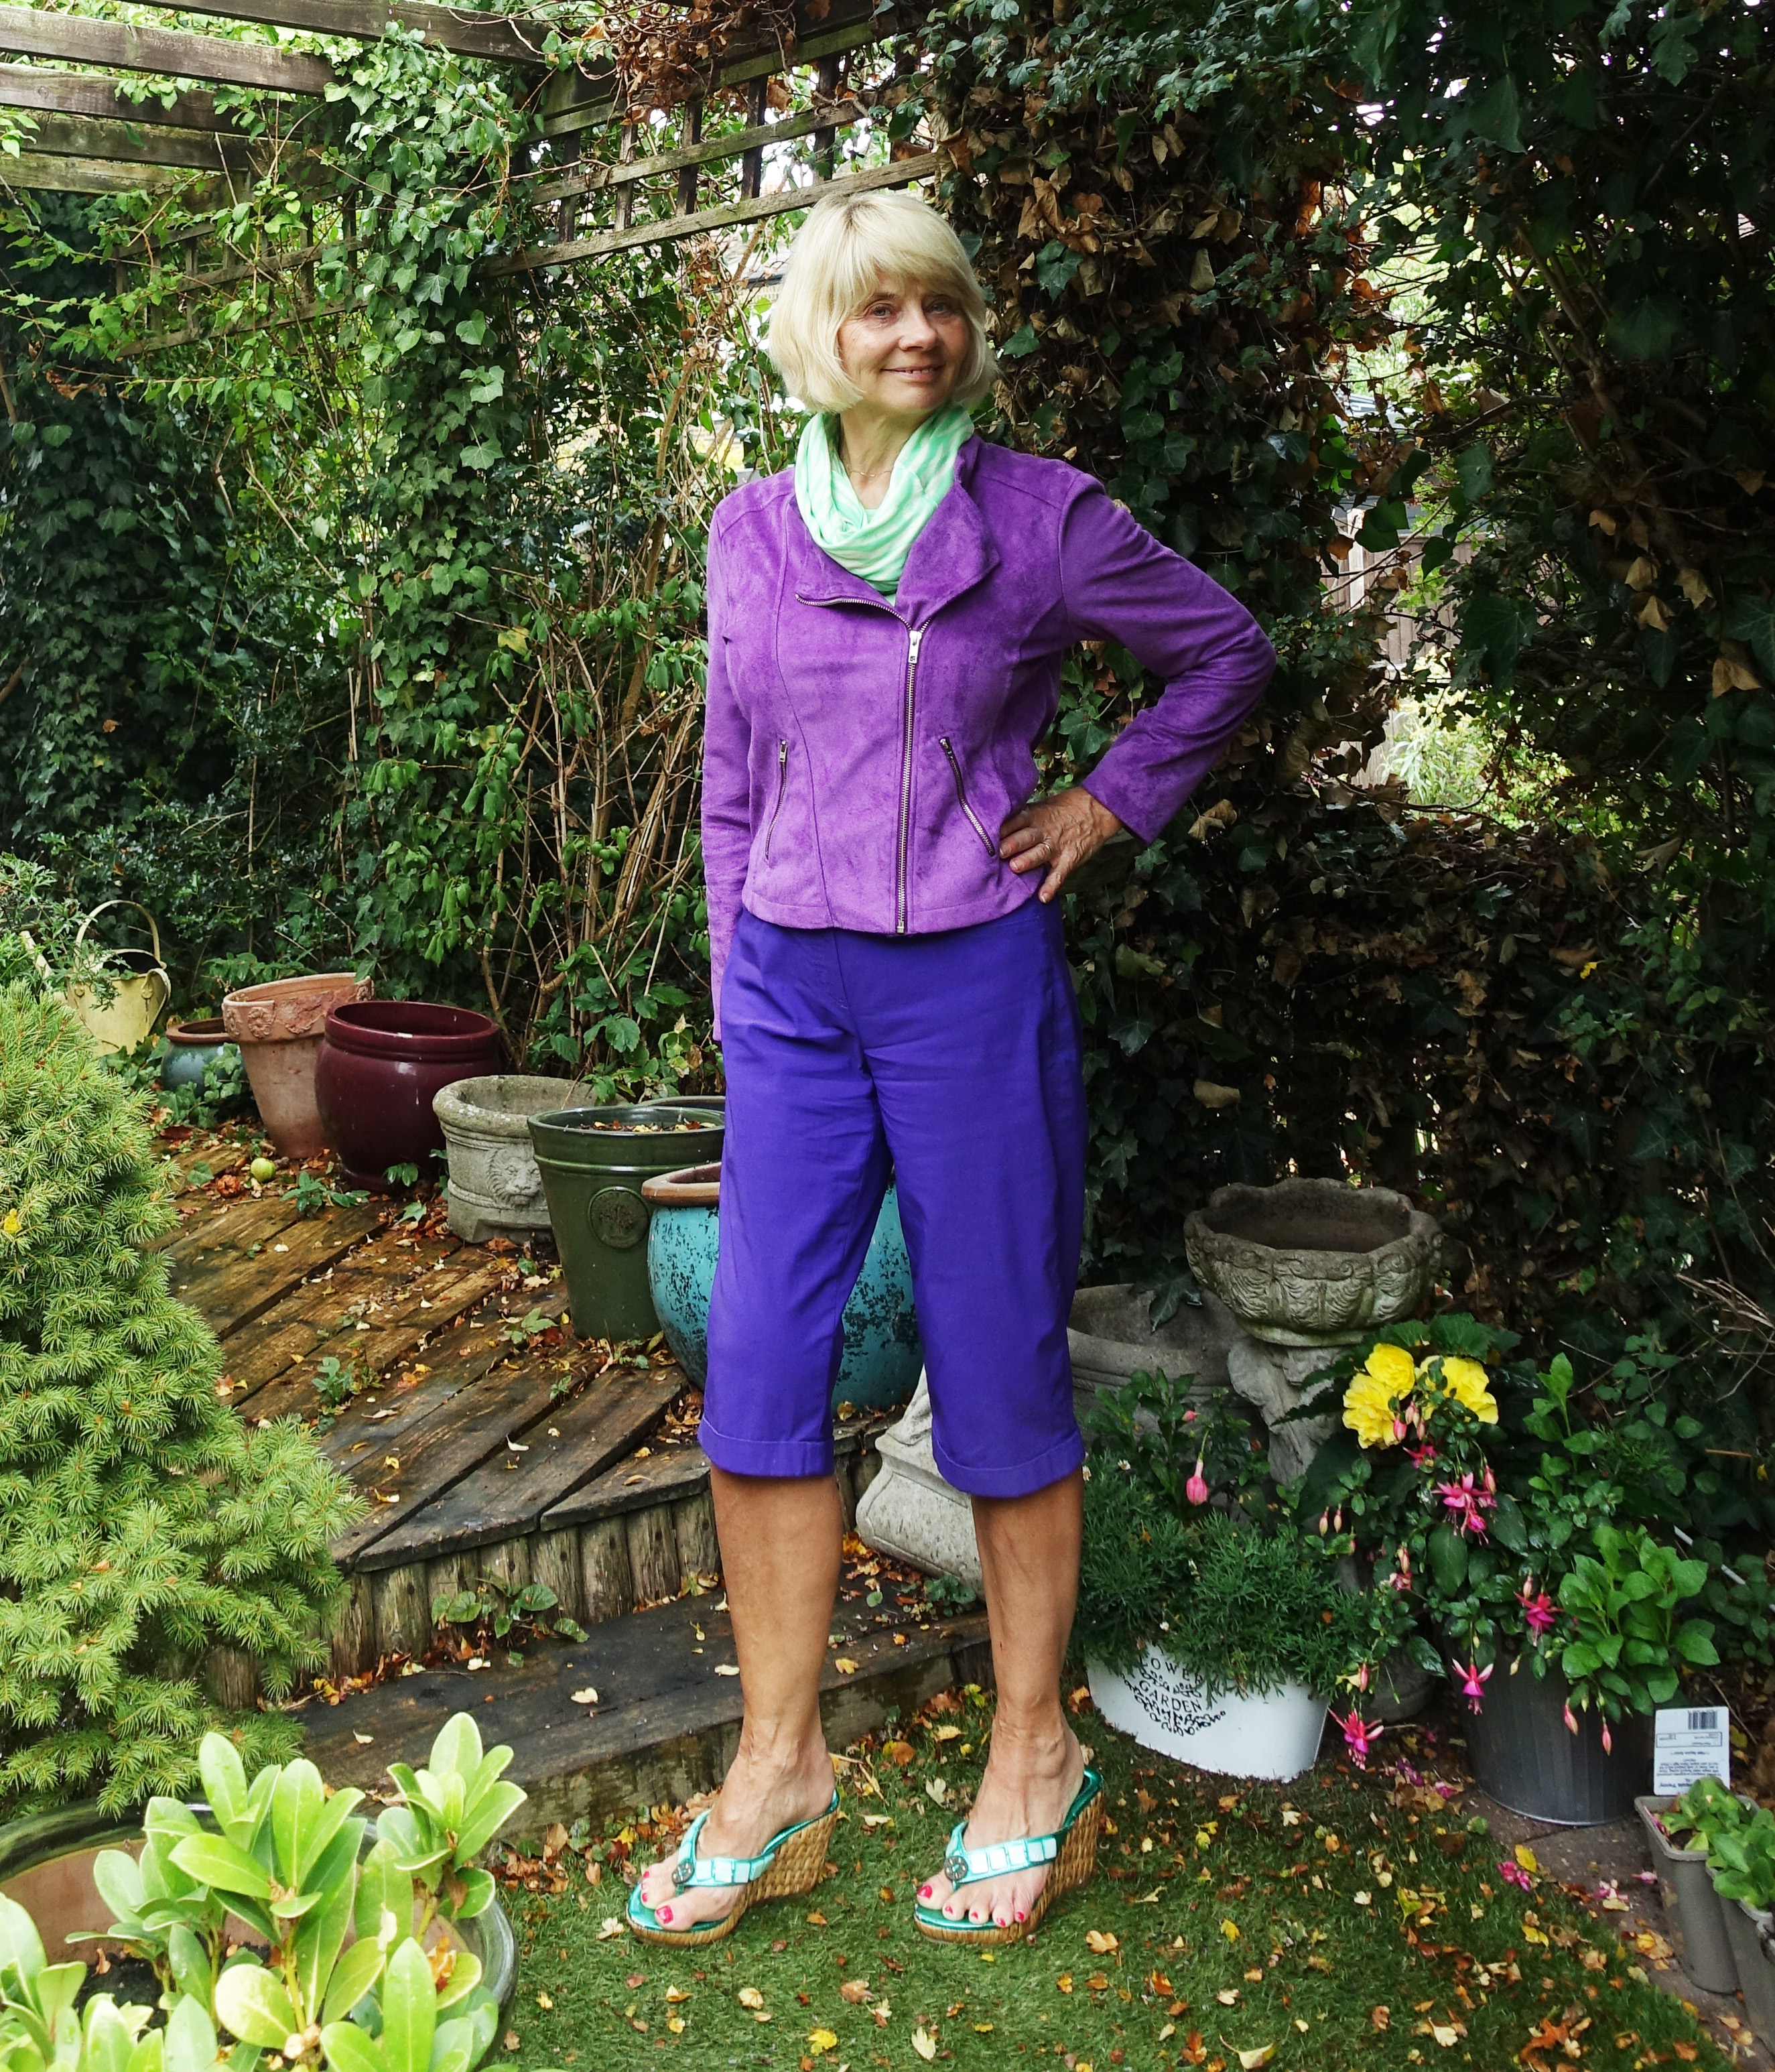 City shorts and a suede jacket and scarf are smart enough for business. Gail Hanlon from Is This Mutton in purple shorts from Robell, Bright Violet jacket and scarf from Kettlewell Colours.